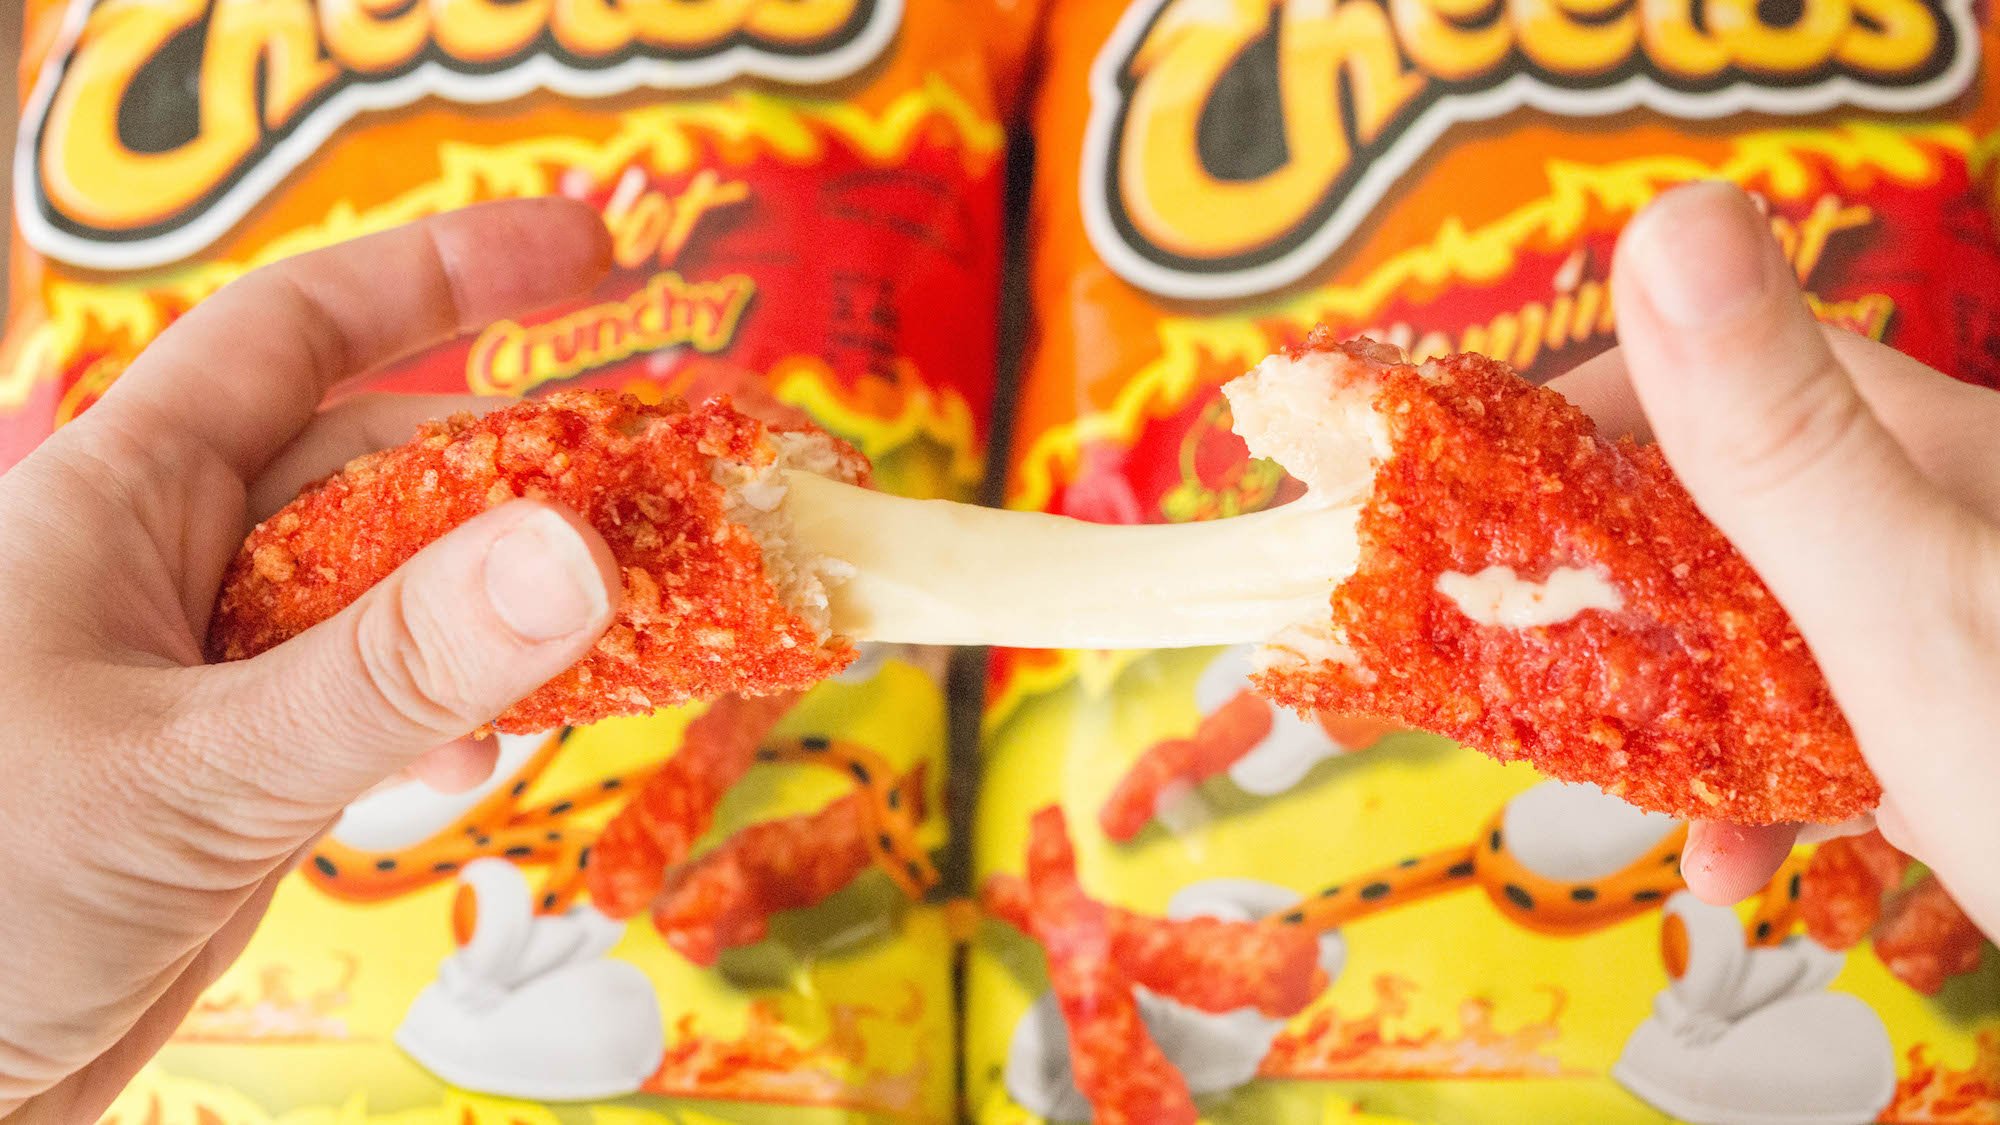 A cheese stick covered in bright orange flamin' hot Cheetos coating is being pulled apart to reveal the melted cheese over two bags of flamin' hot Cheetos.